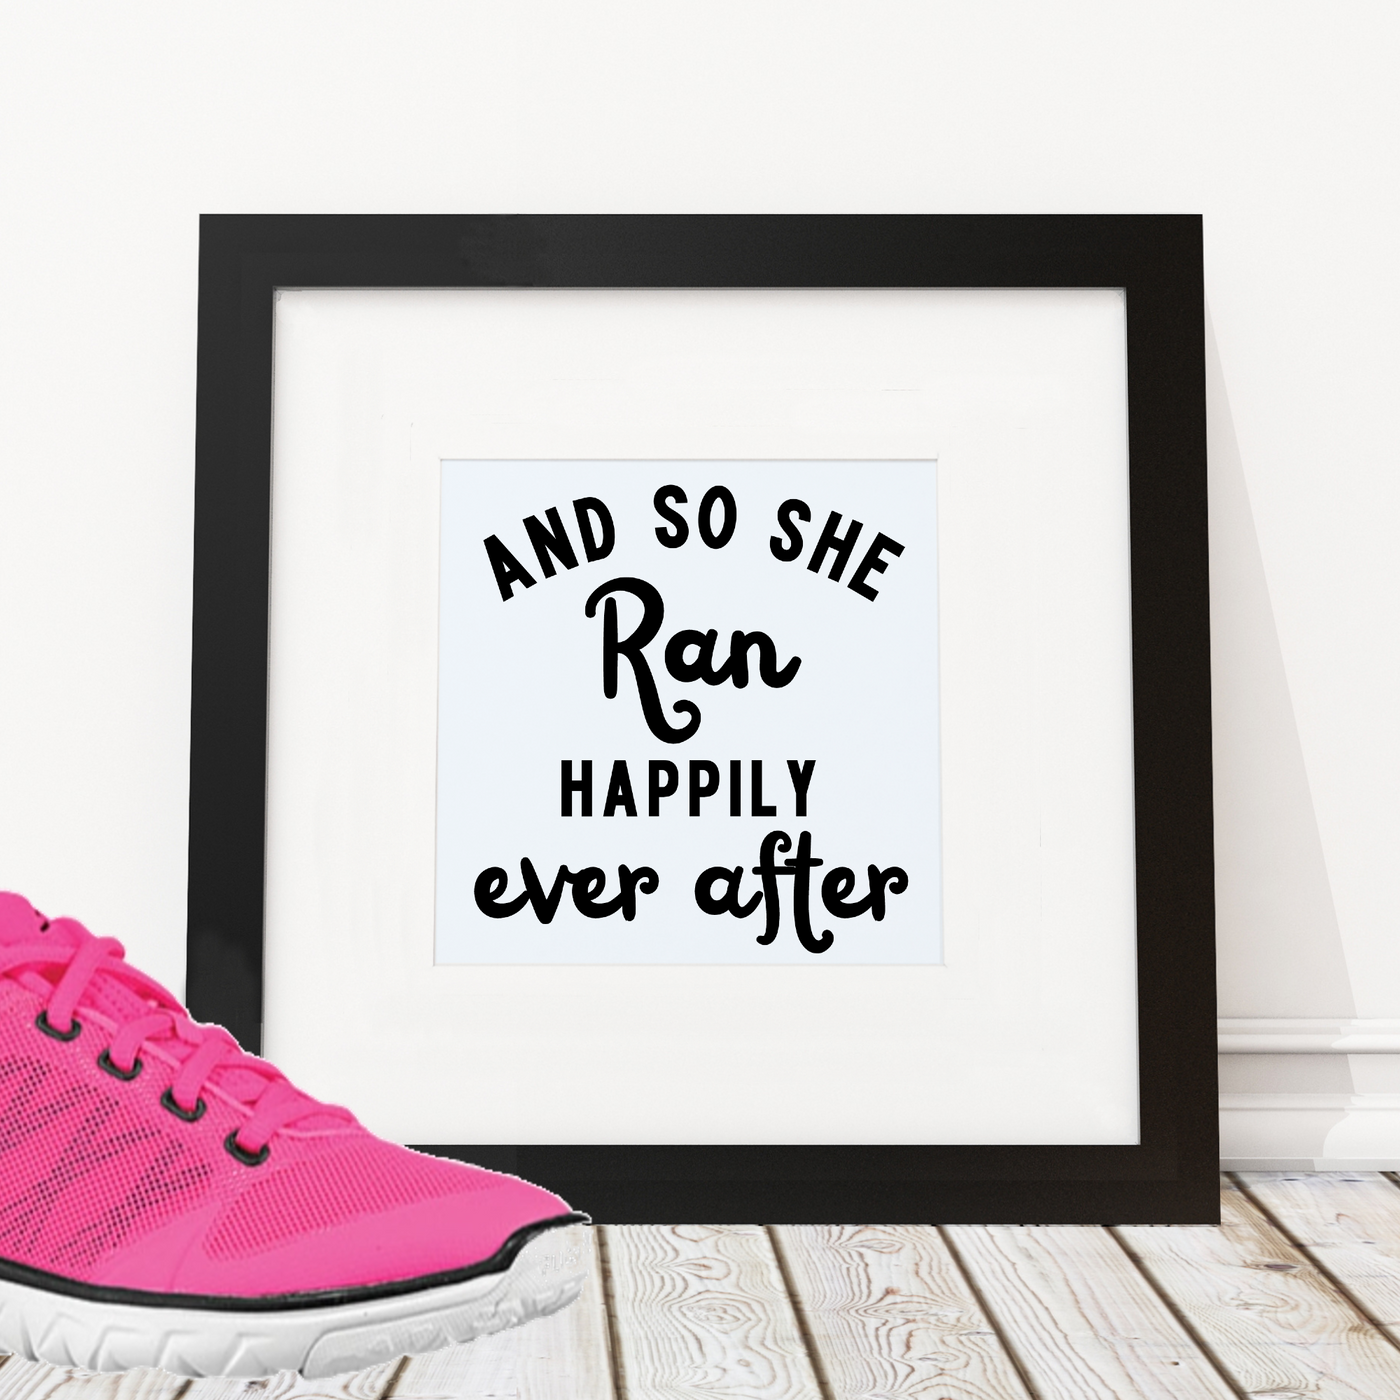 She Ran Happily Ever After - Framed Print